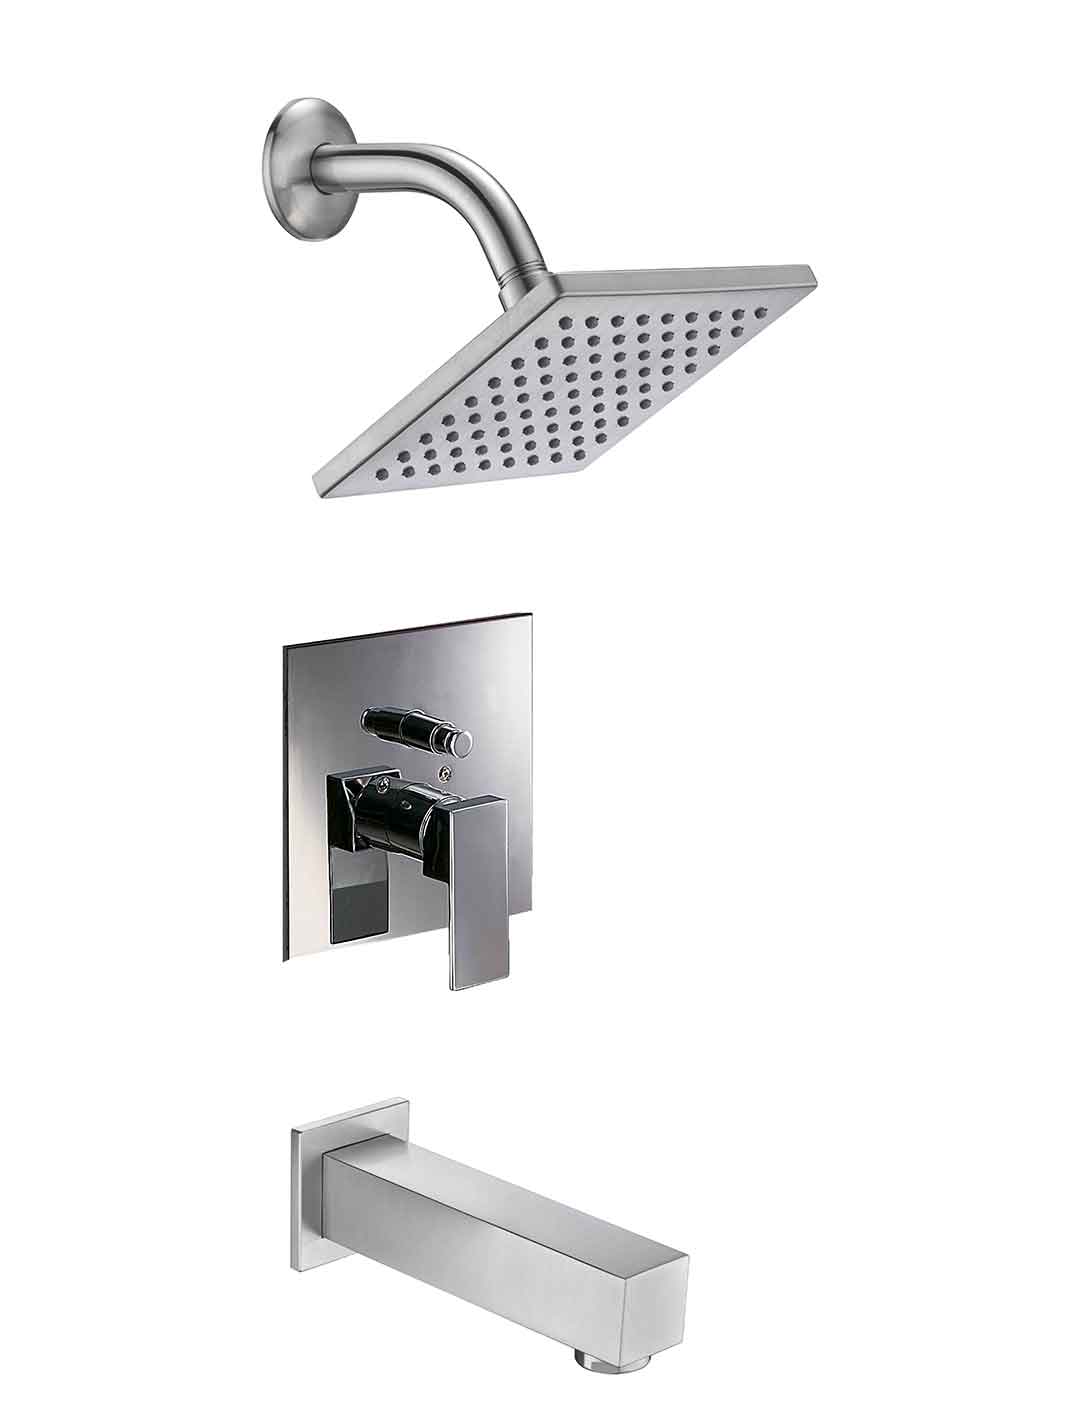 Shower head, diverter and spout in brushed nickel